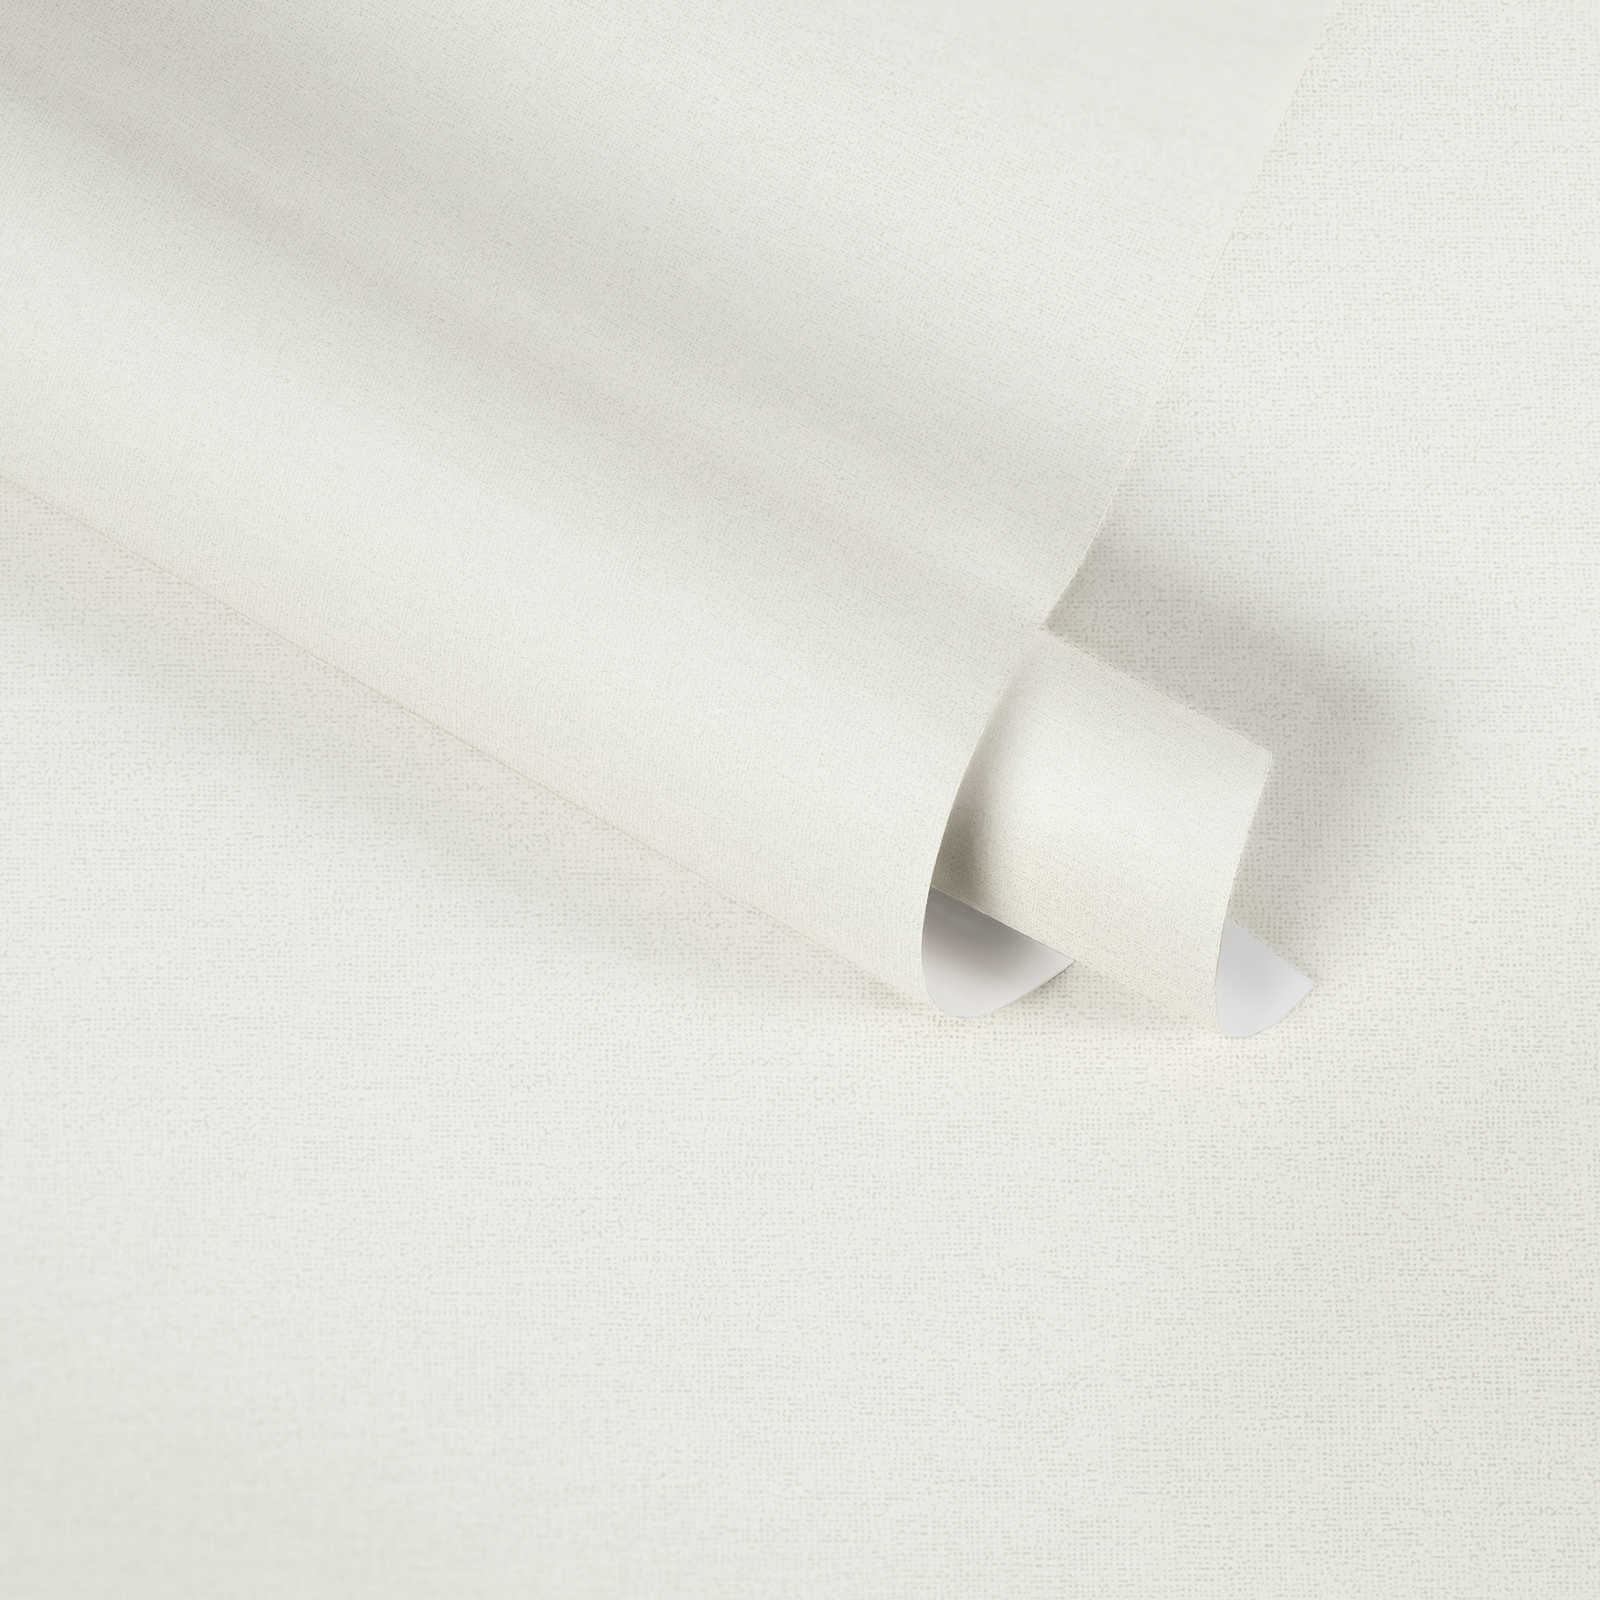             Plain wallpaper cream-white from MICHASLKY with textile structure
        